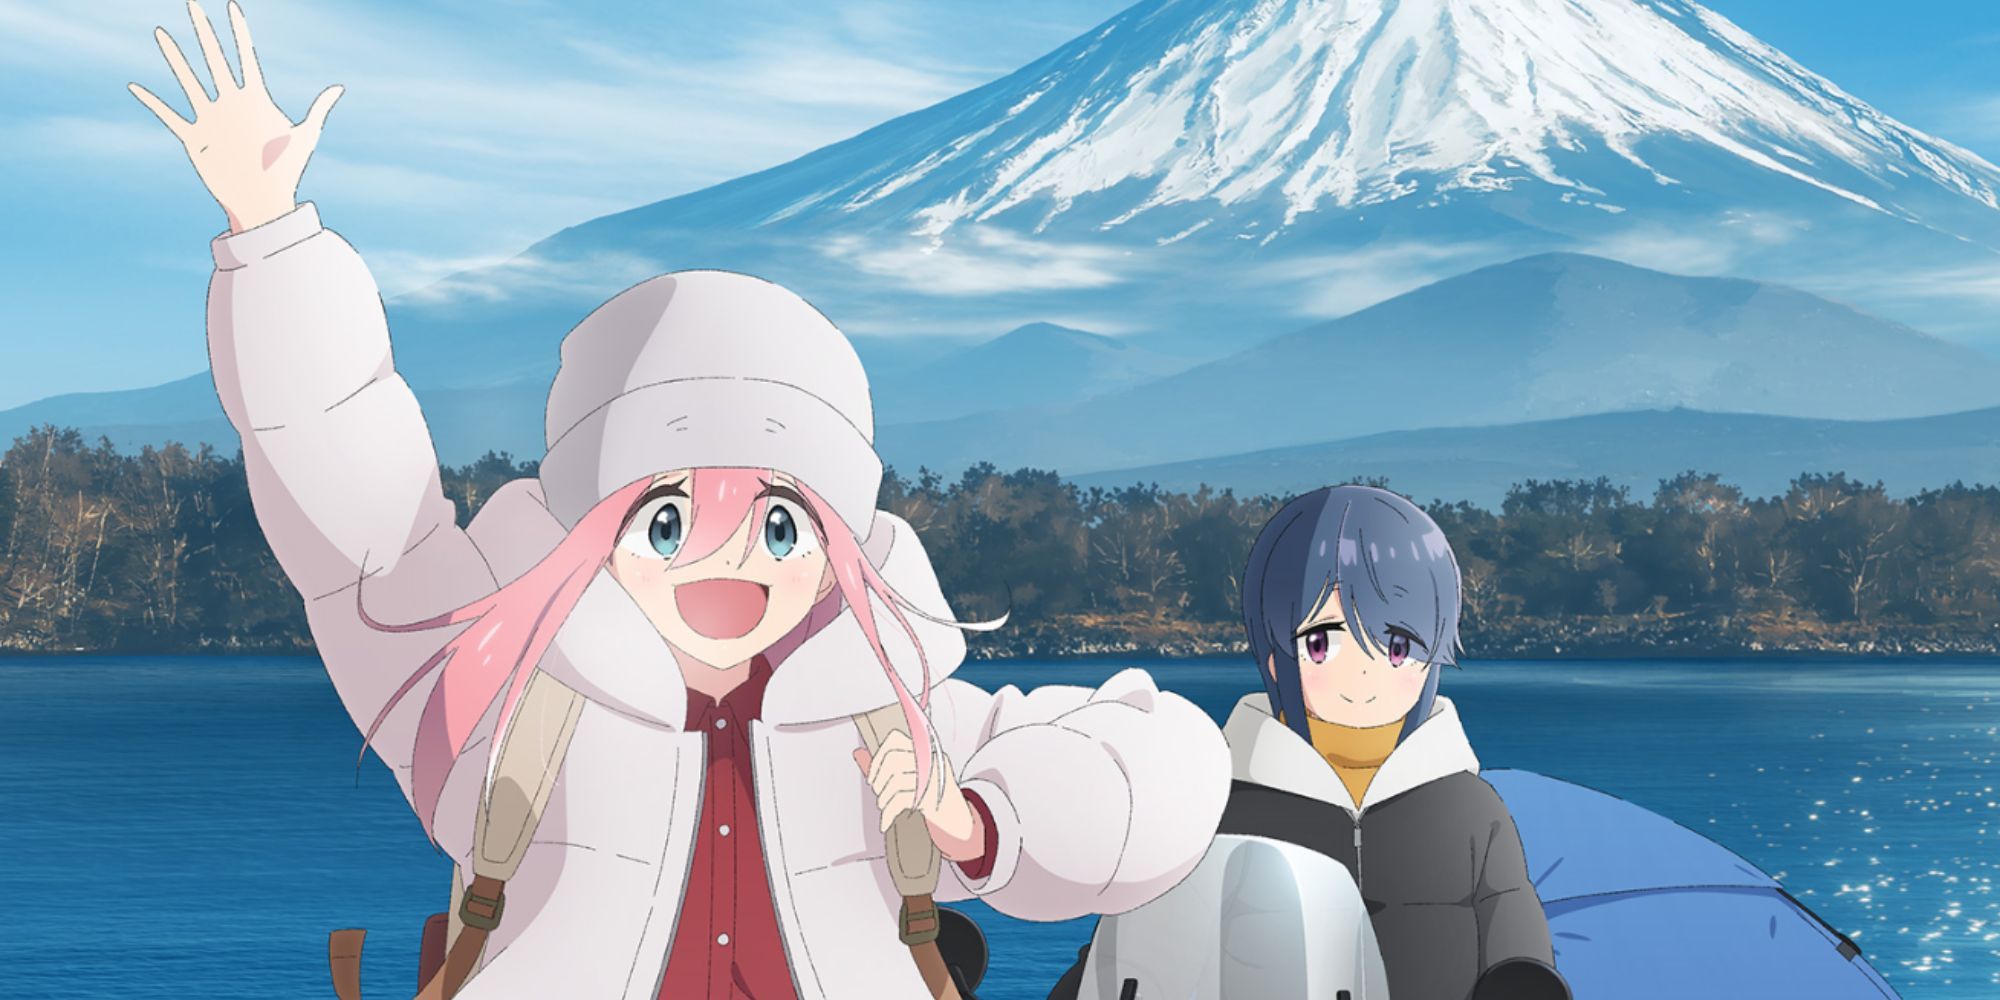 Nadeshiko and Rin from Laid-Back Camp in a promotional image for Season 3